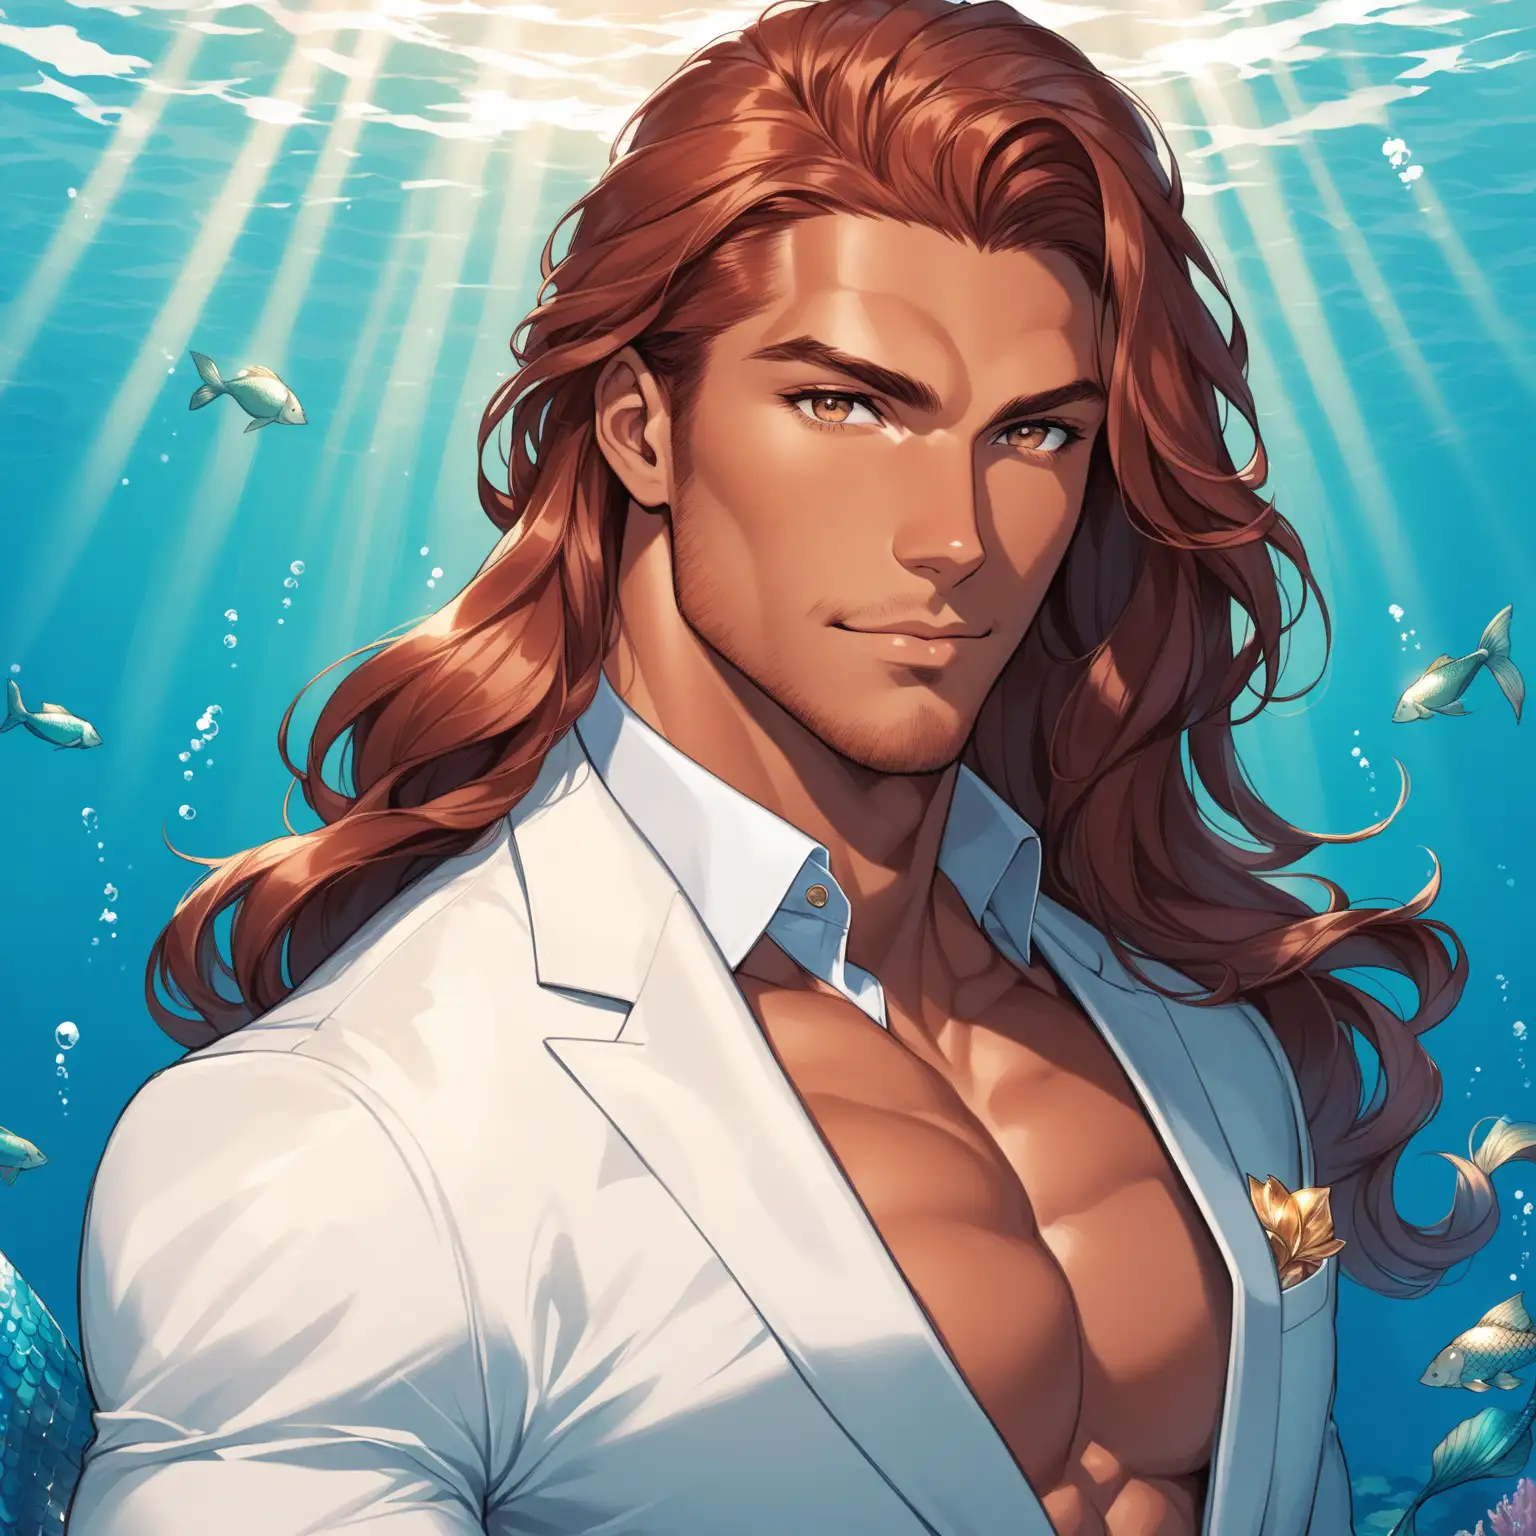 A tall, handsome and muscular man with long wavy auburn hair and light brown eyes. His skin is tan. He often wears a tailored suit, giving him a sophisticated and polished appearance. His physical presence exudes confidence and power, adding to his allure. Have him in mermaid 